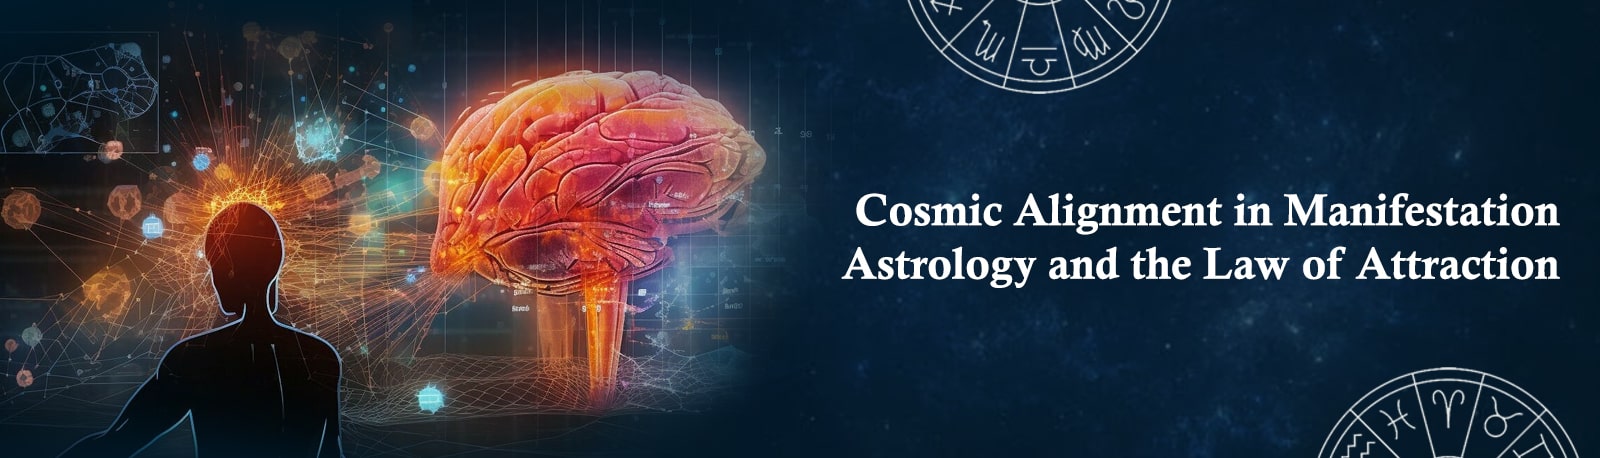 Cosmic Alignment in Manifestation: Astrology and the Law of Attraction